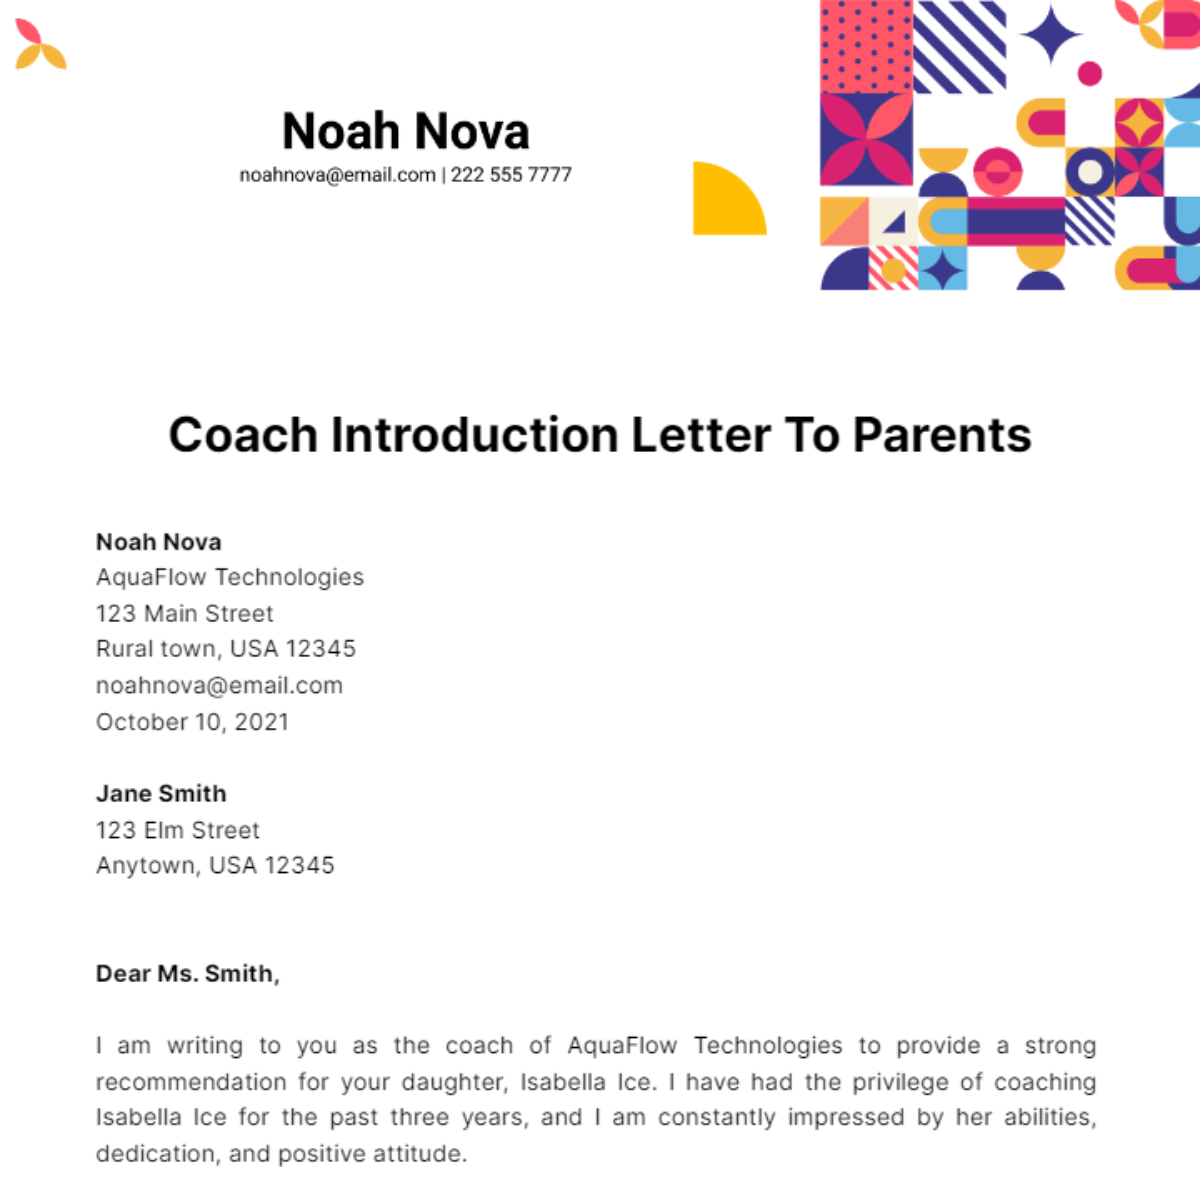 Coach Introduction Letter To Parents Template